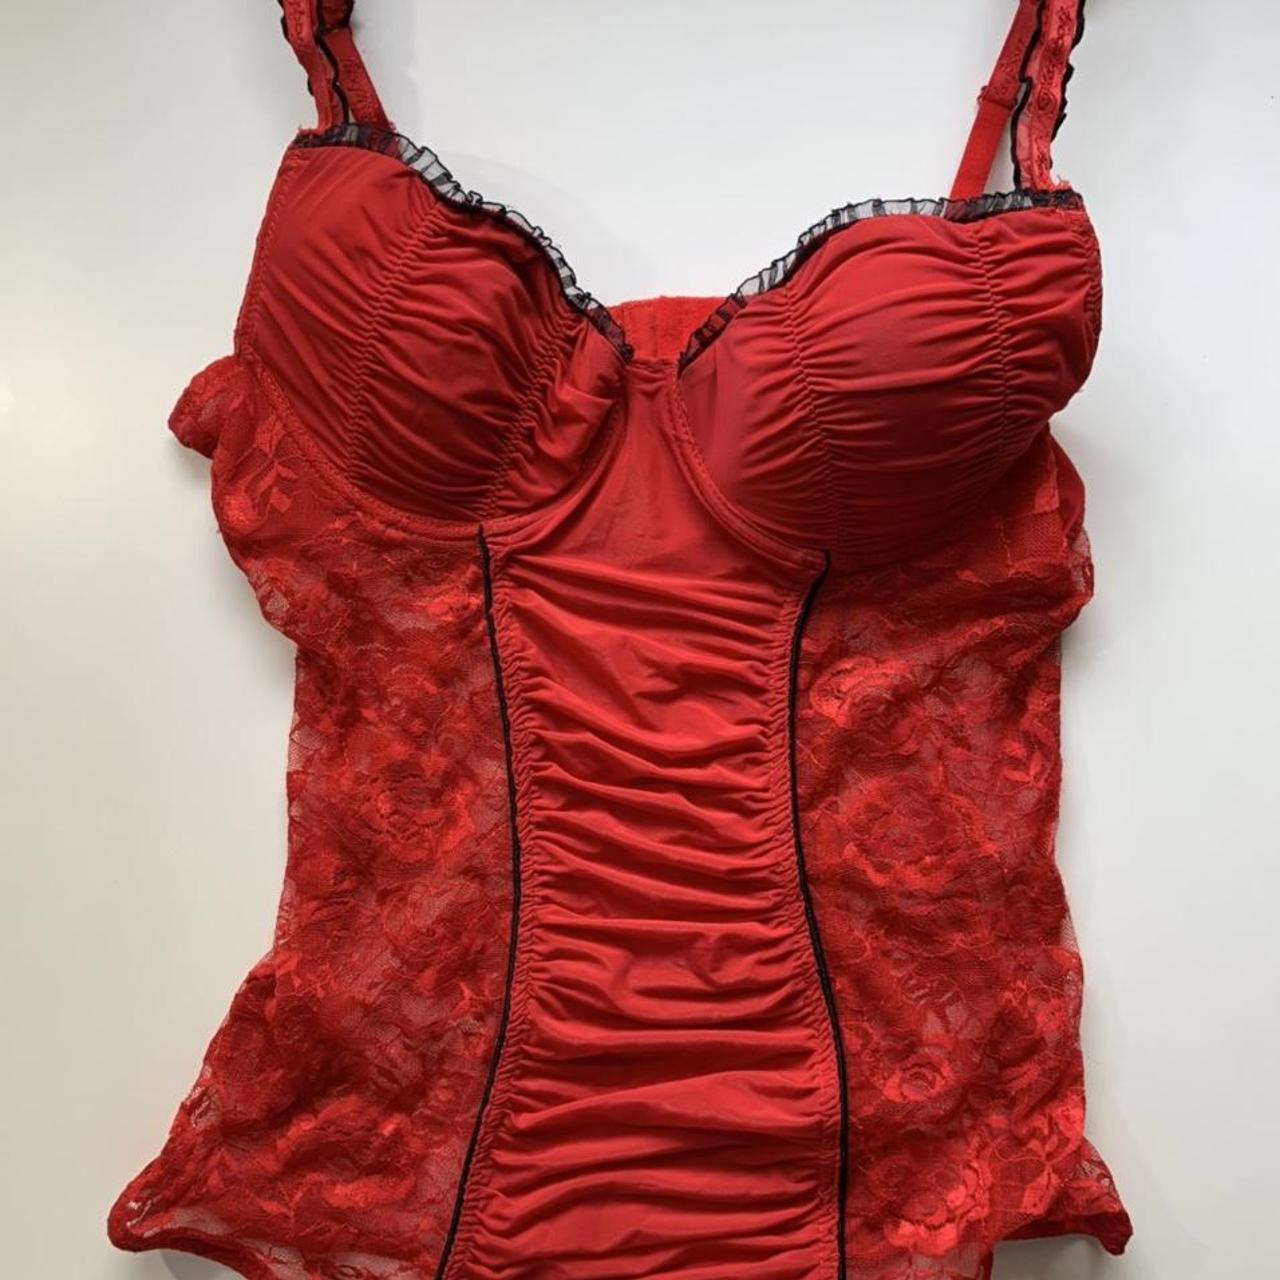 Playboy Famouse Red Corset/Bustier ️Size M as seen... - Depop